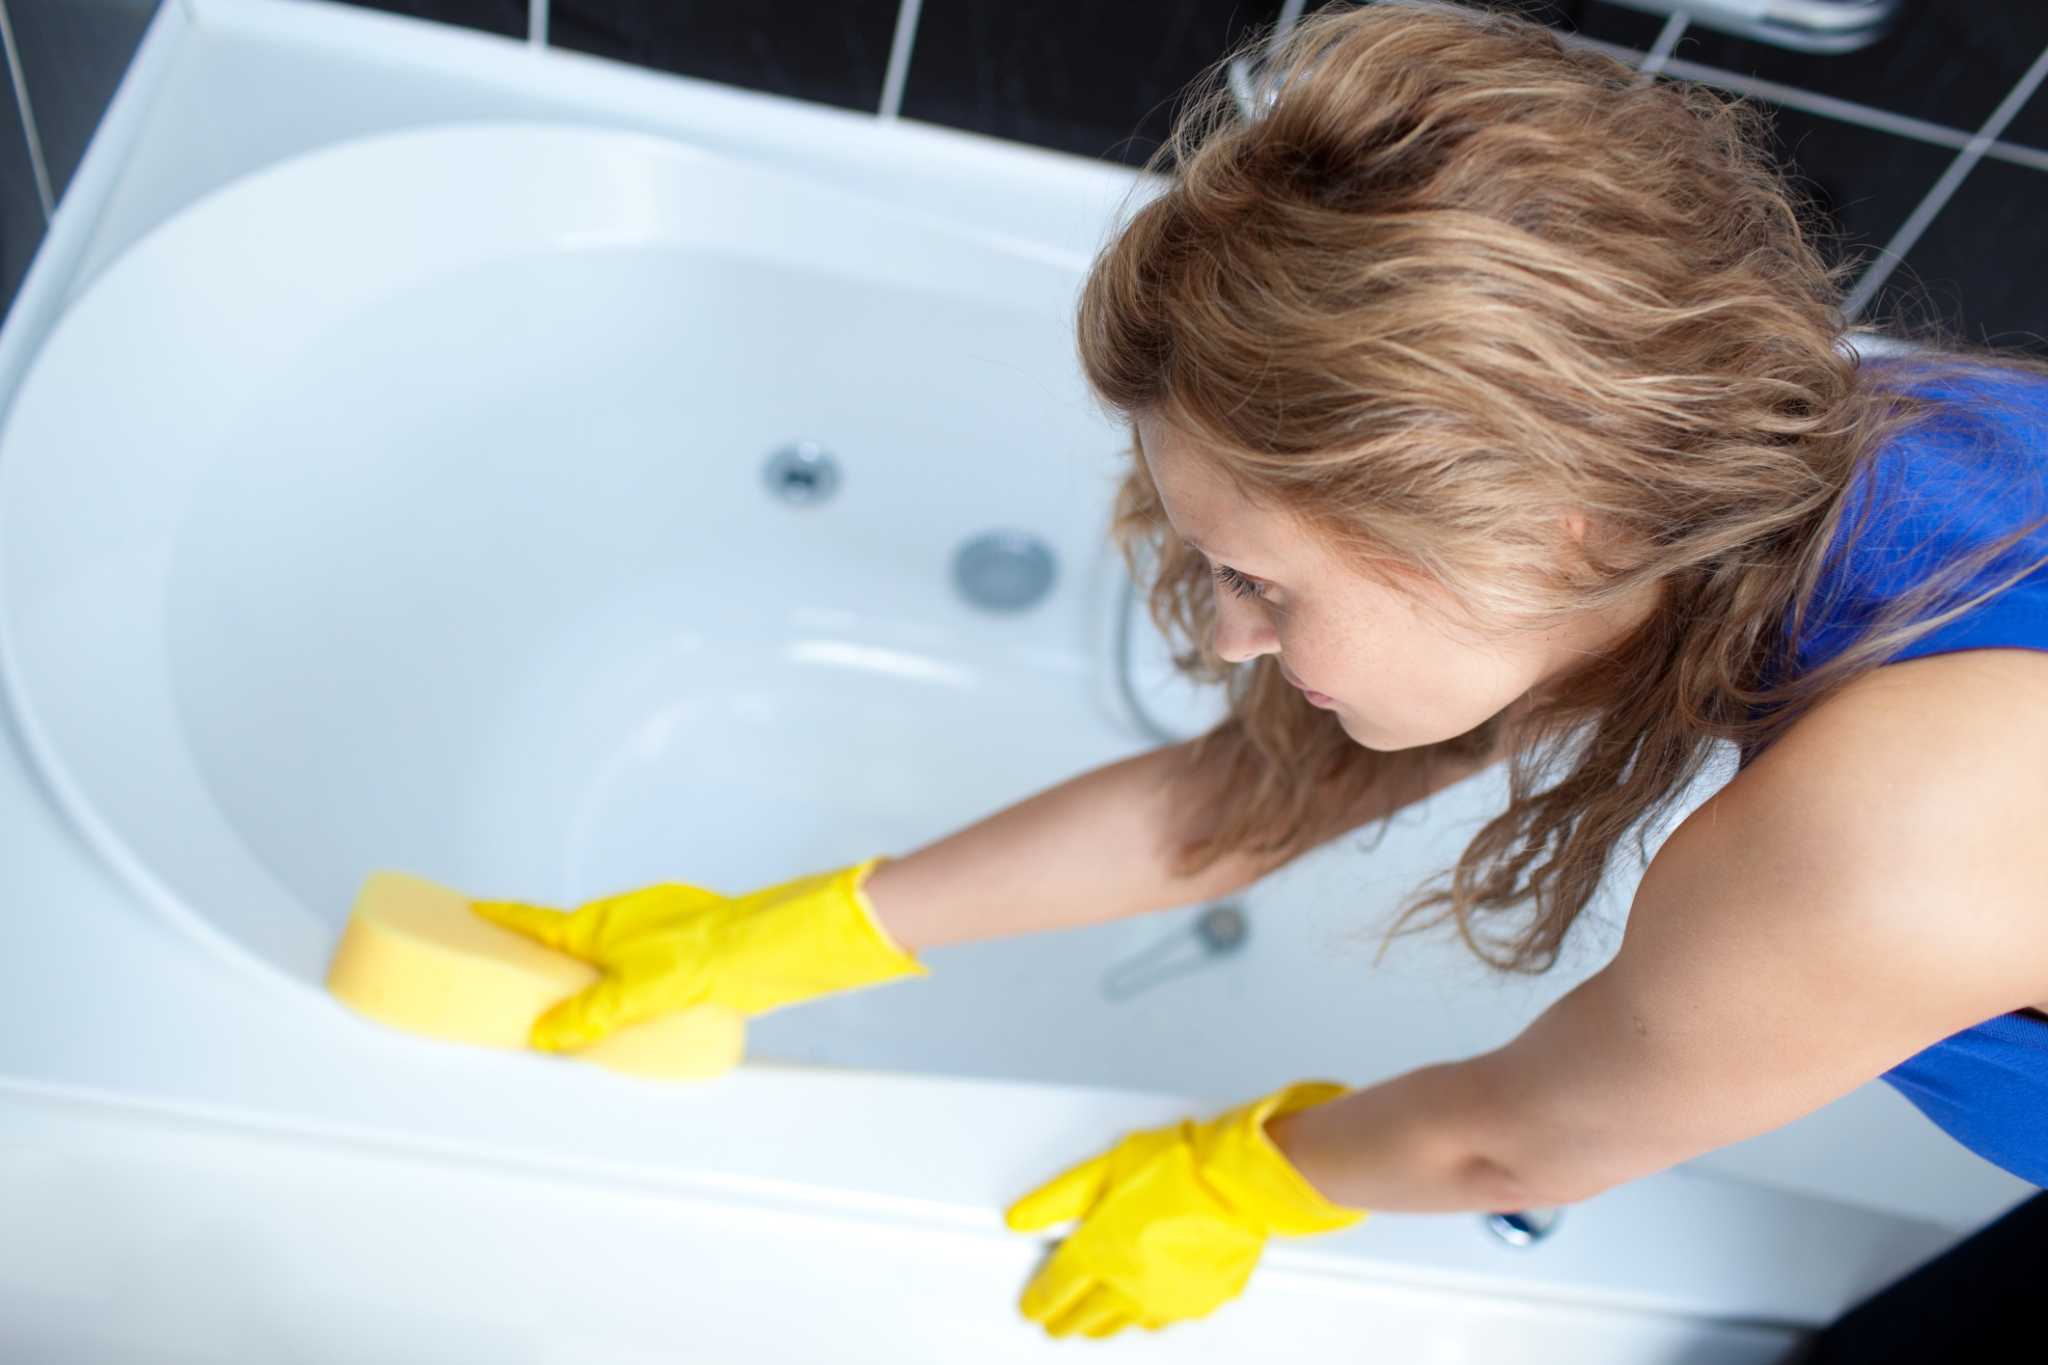 How To Remove Stains From A Fiberglass Bathtub